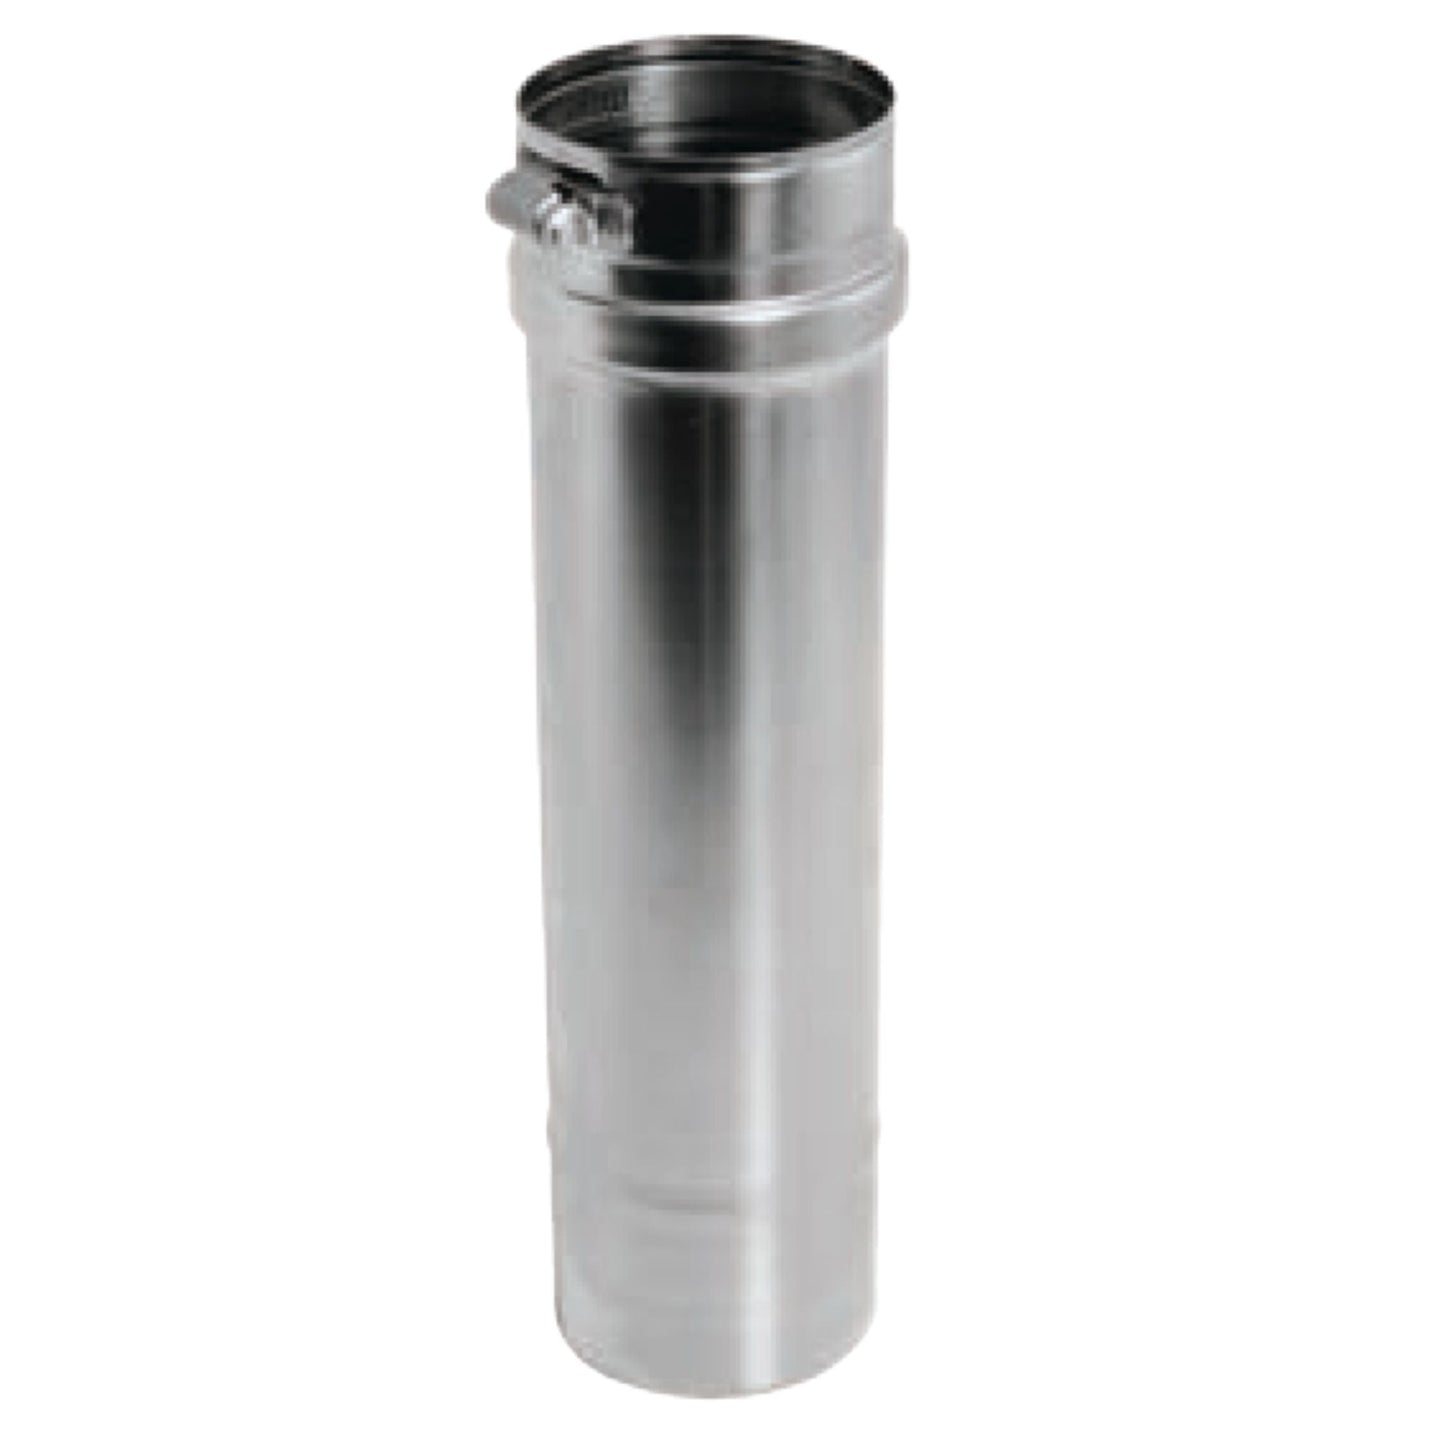 DuraVent FasNSeal 3" x 24" 29-4C Stainless Steel Vent Length